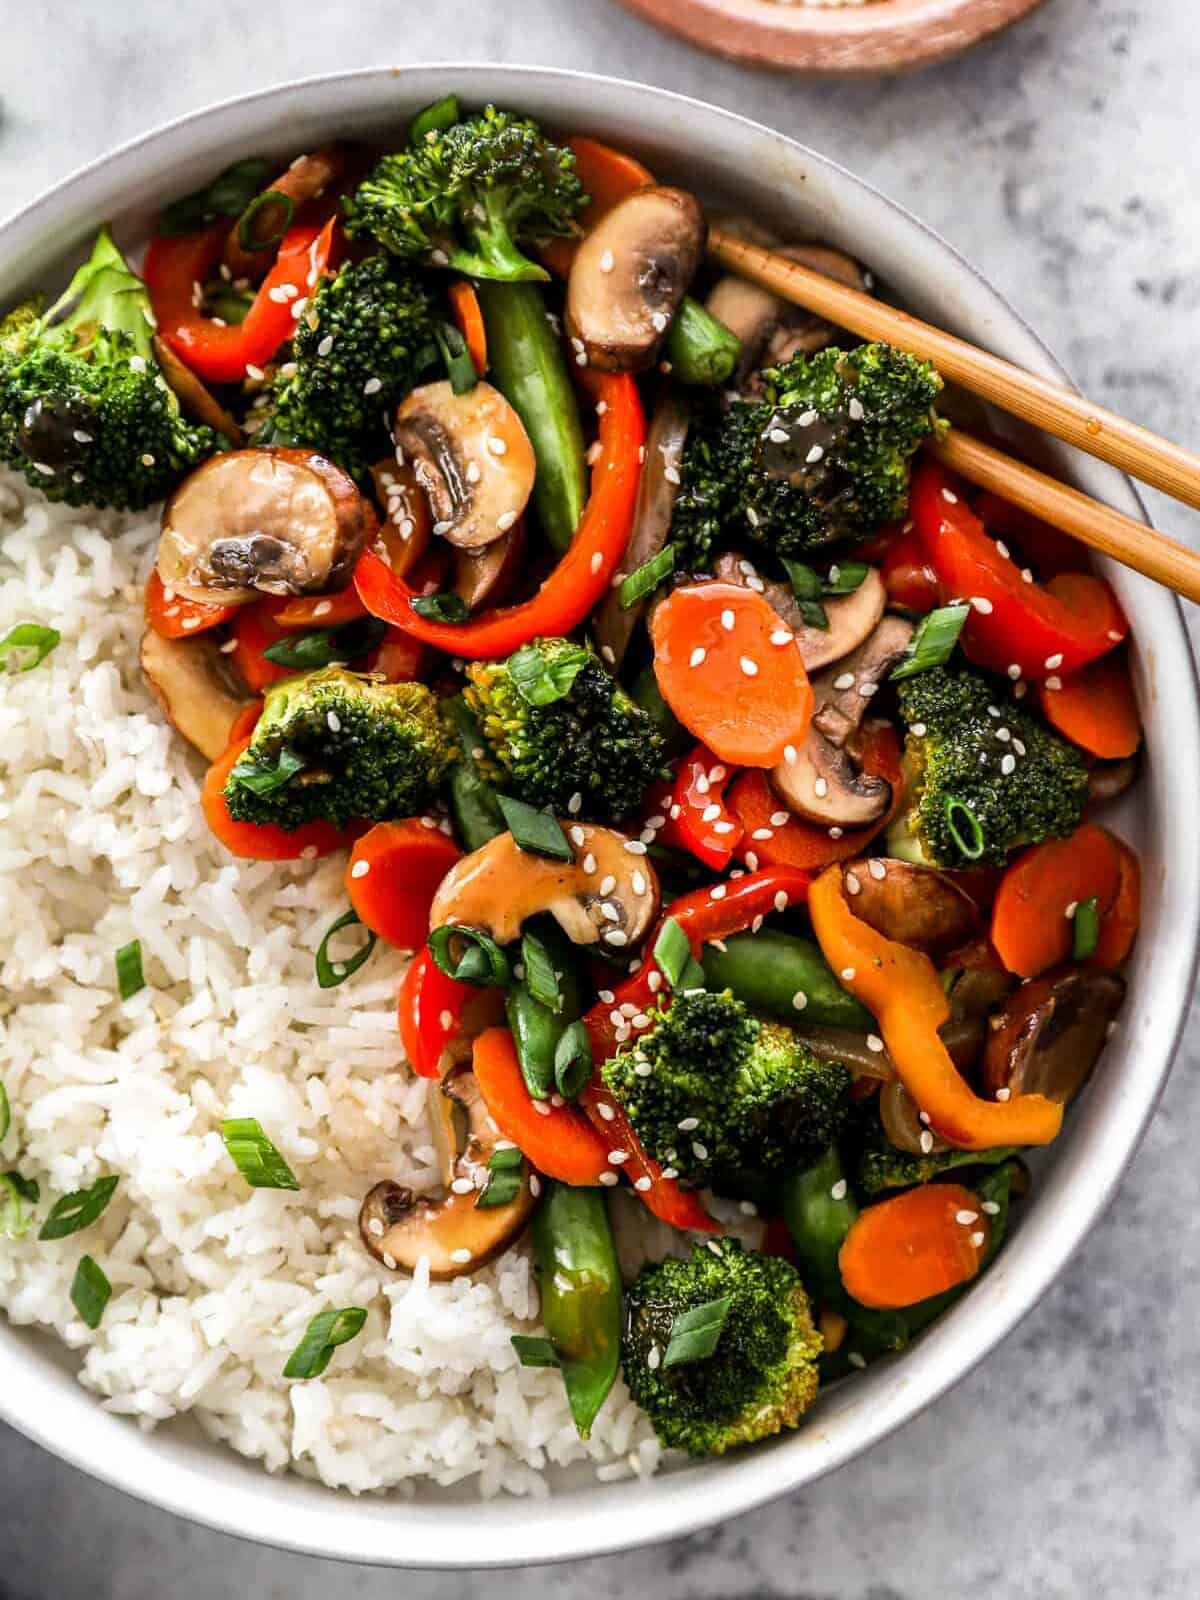 partial overhead view of vegetable stir fry in a white bowl with white rice and chopsticks.